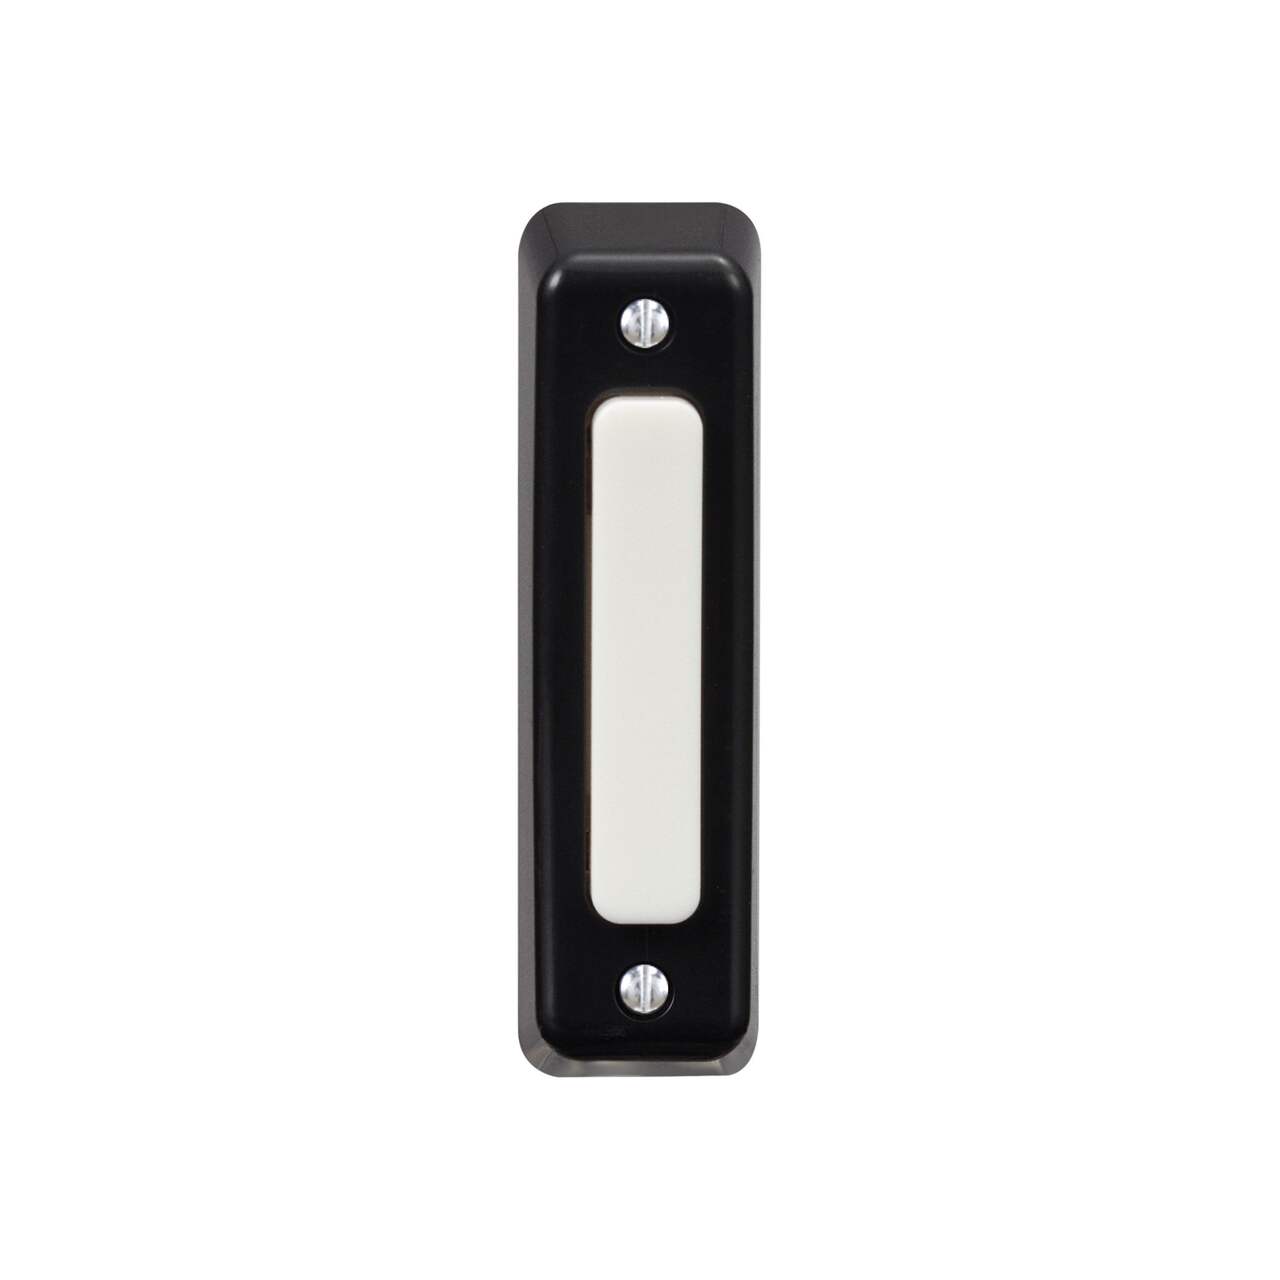 https://media-www.canadiantire.ca/product/fixing/hardware/curb-appeal/0528698/heathzenitha-black-plastica-door-chime-button-f00c4395-dc48-4ddd-88be-6215adbf65f3-jpgrendition.jpg?imdensity=1&imwidth=640&impolicy=mZoom